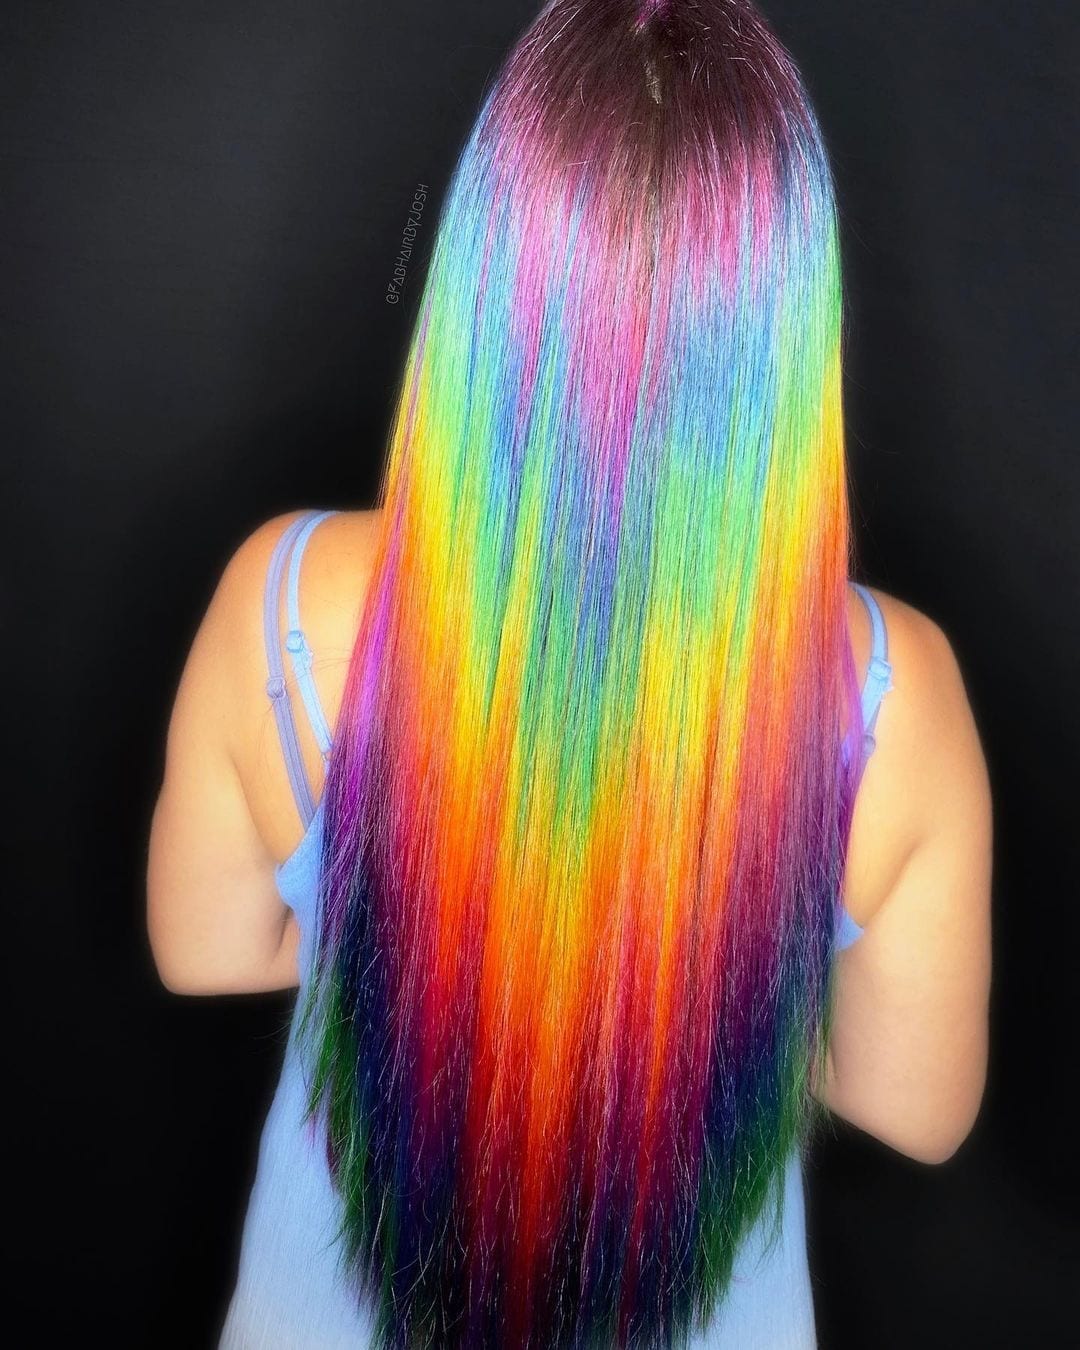 Holographic spectrum hair with bright shades of yellow and orange and muted blue and purples